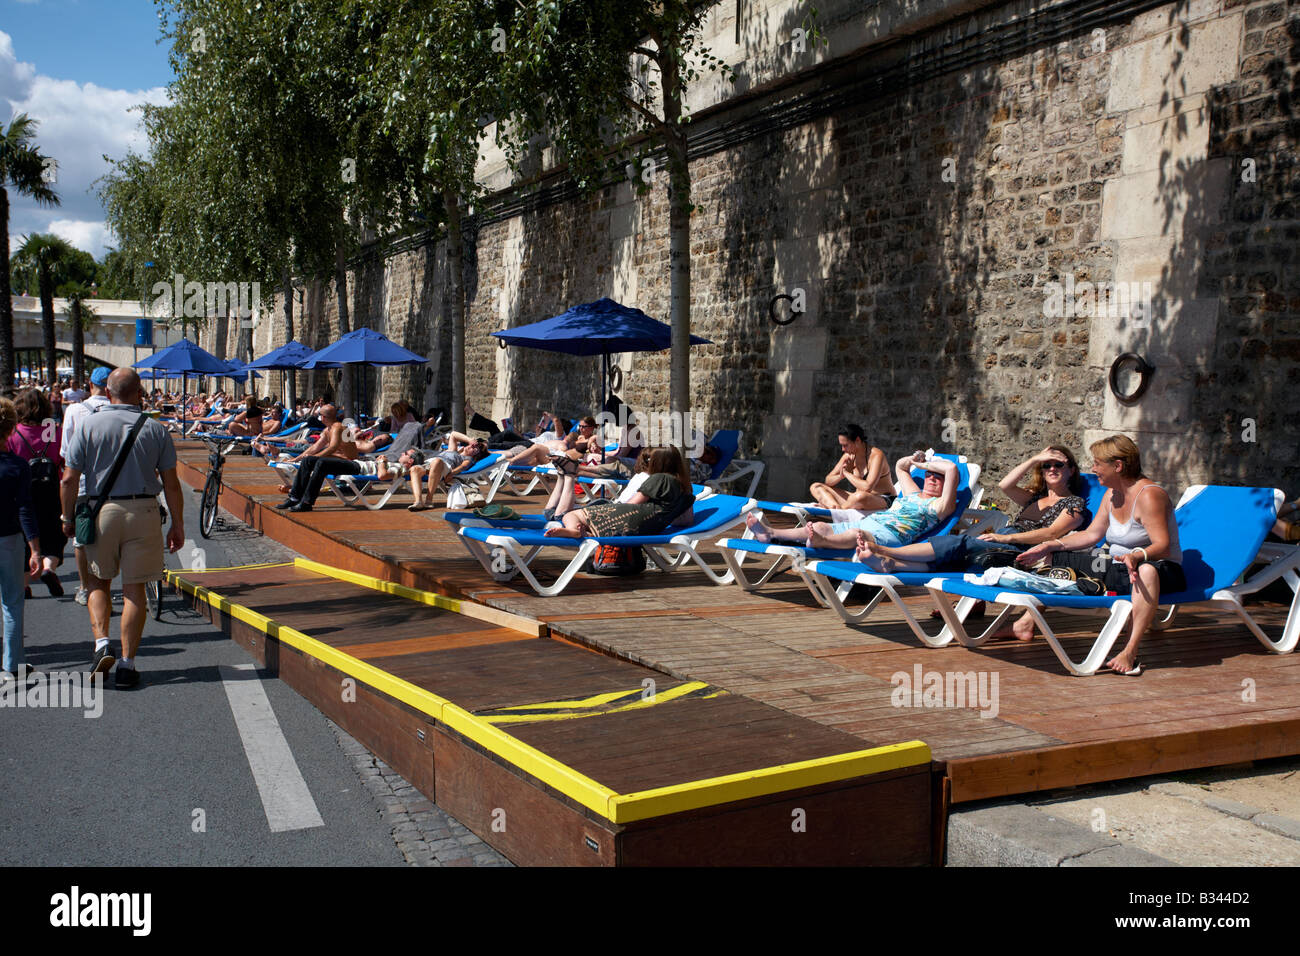 Paris Plage artificial beach and sunbathing areas by the River Seine Paris France Stock Photo